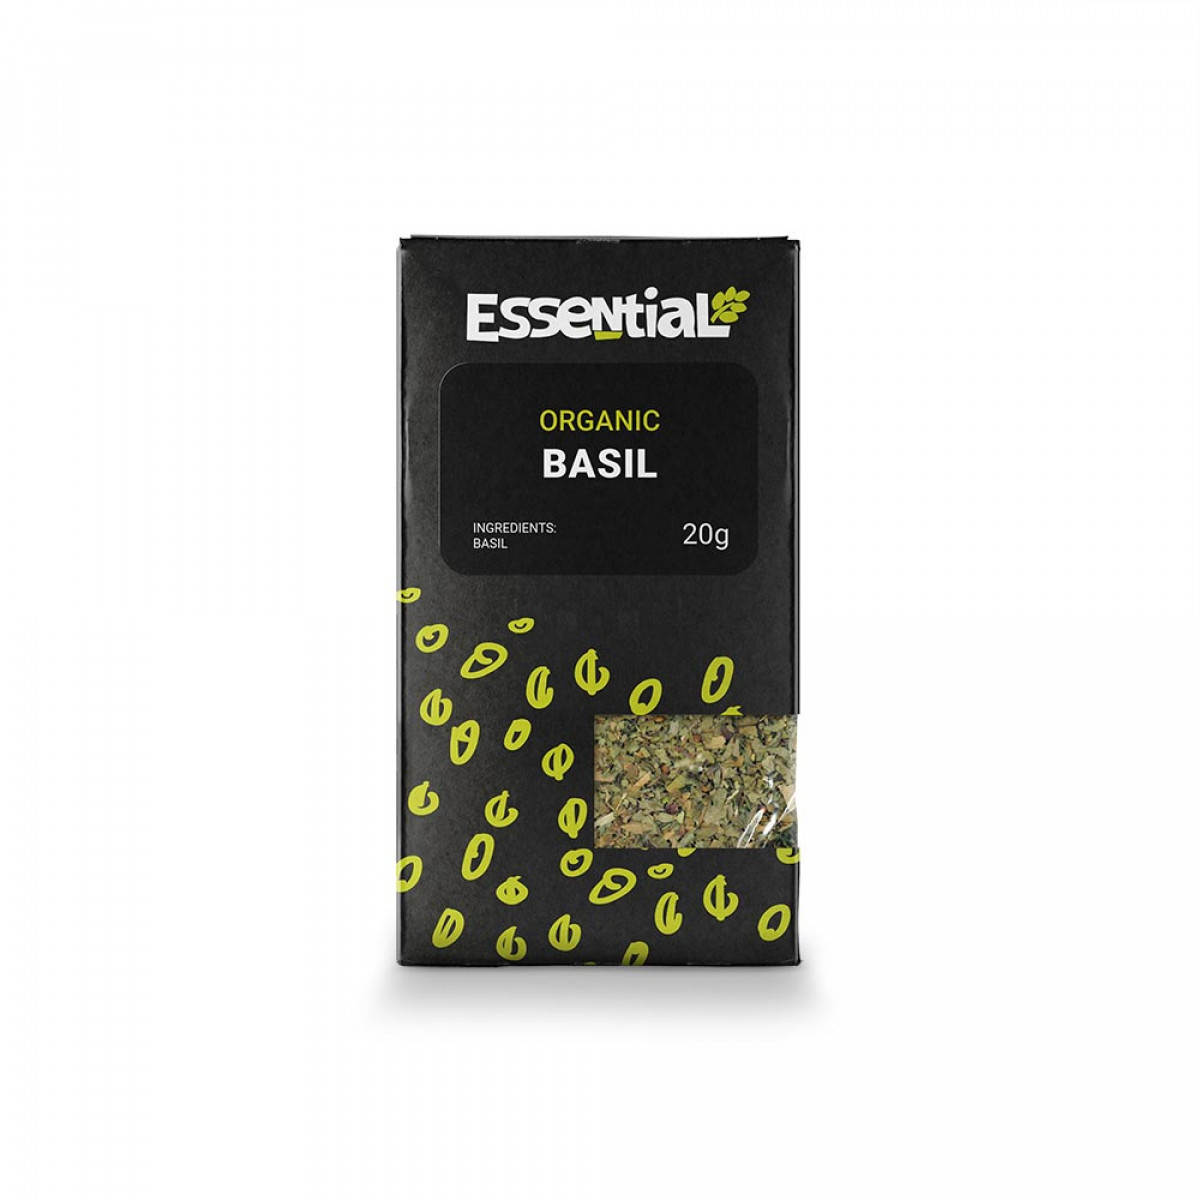 Product picture for Basil